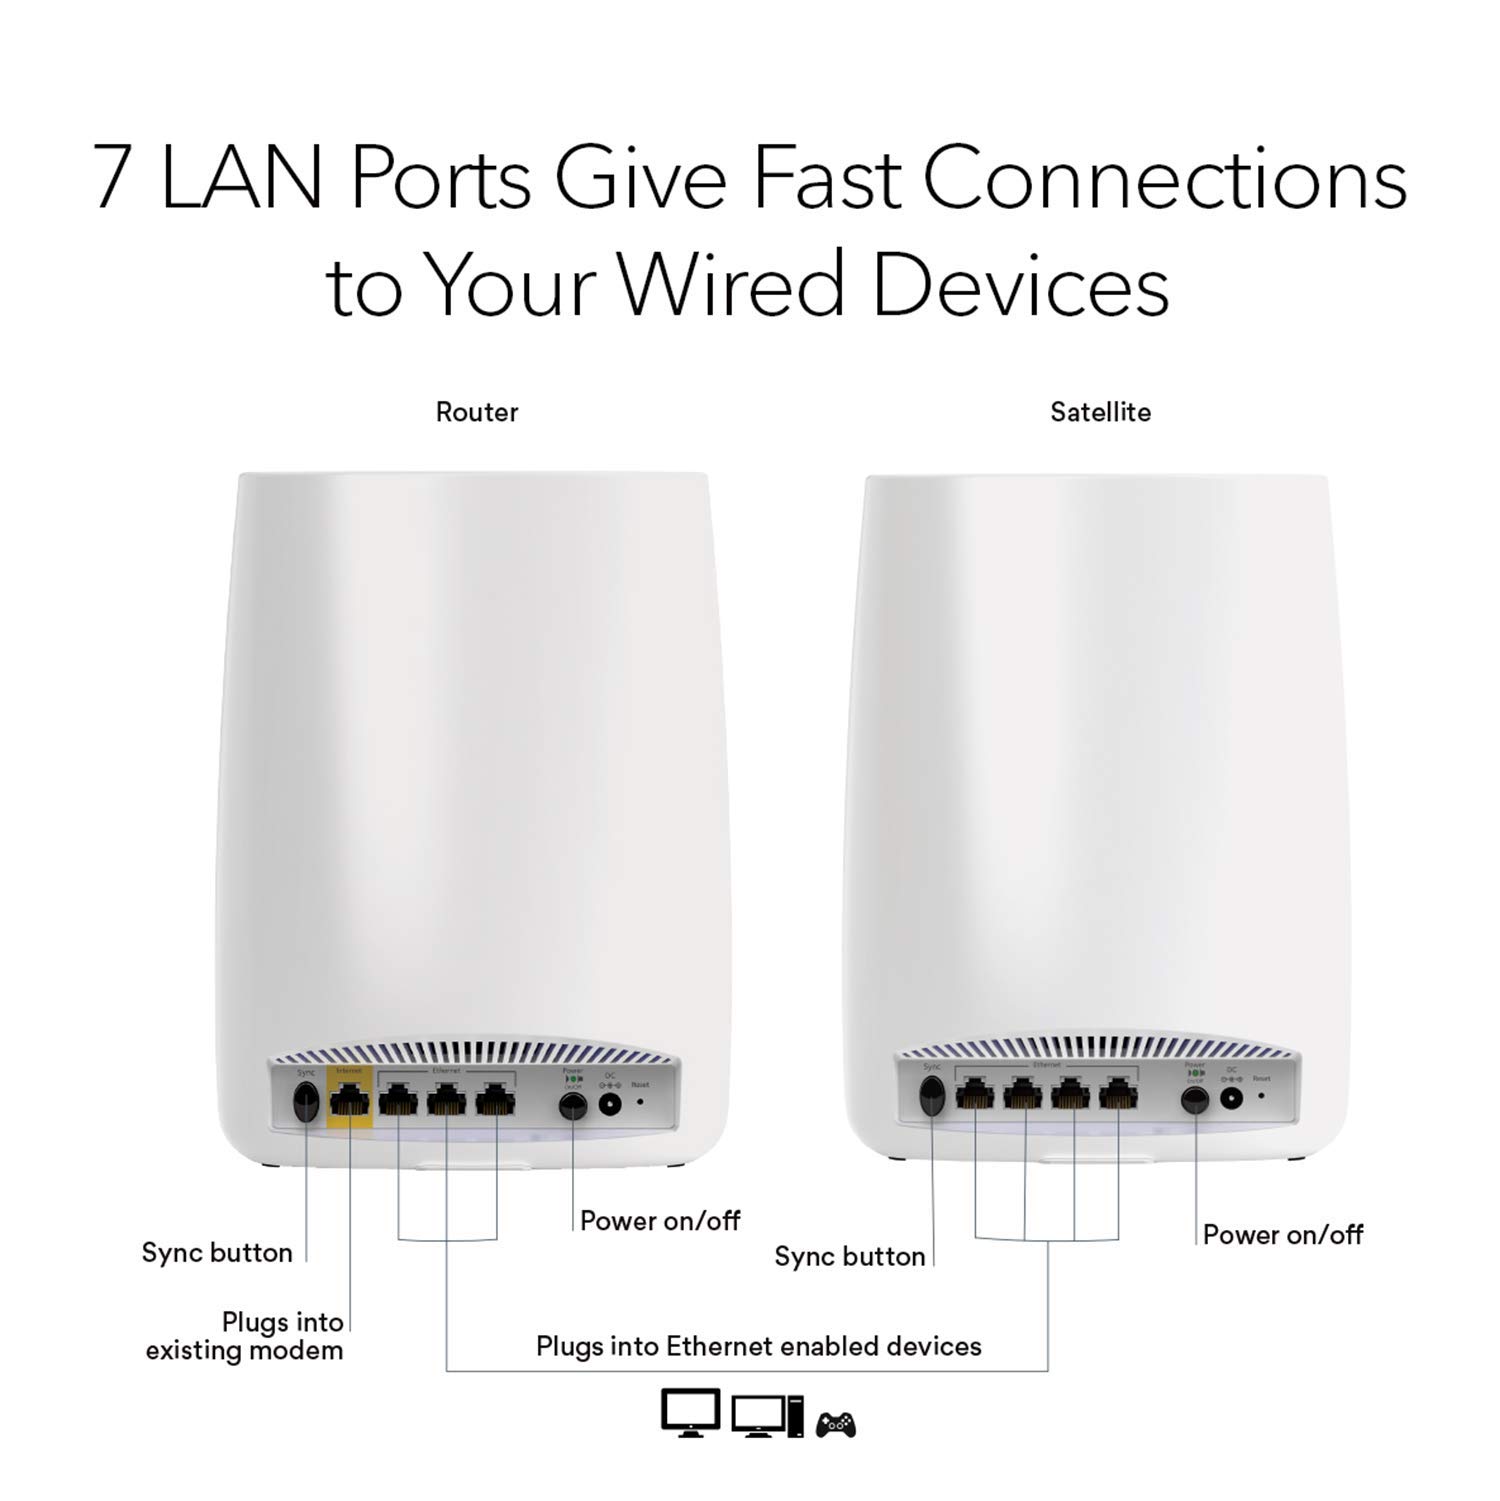 NETGEAR Orbi Tri-band Whole Home Mesh WiFi System with 3Gbps Speed (RBK50) – Router & Extender Replacement Covers Up to 5,000 sq. ft., 2-Pack Includes 1 Router & 1 Satellite White